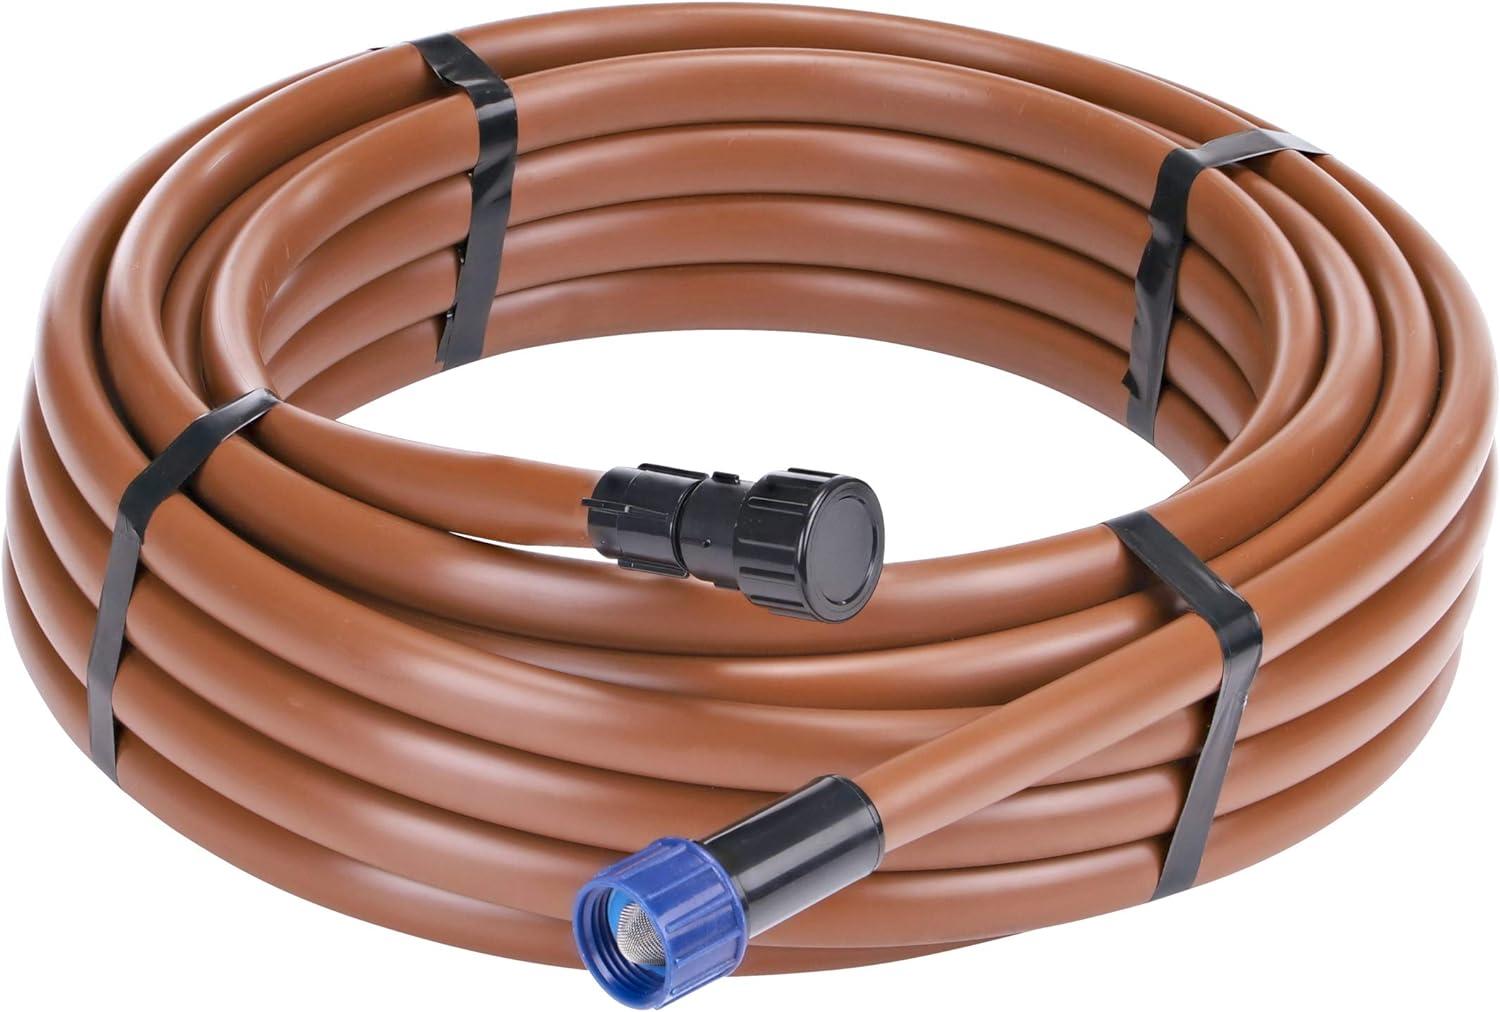 Raindrip SDT50P 5/8in Drip Irrigation Supply Tubing 50ft for $11.98